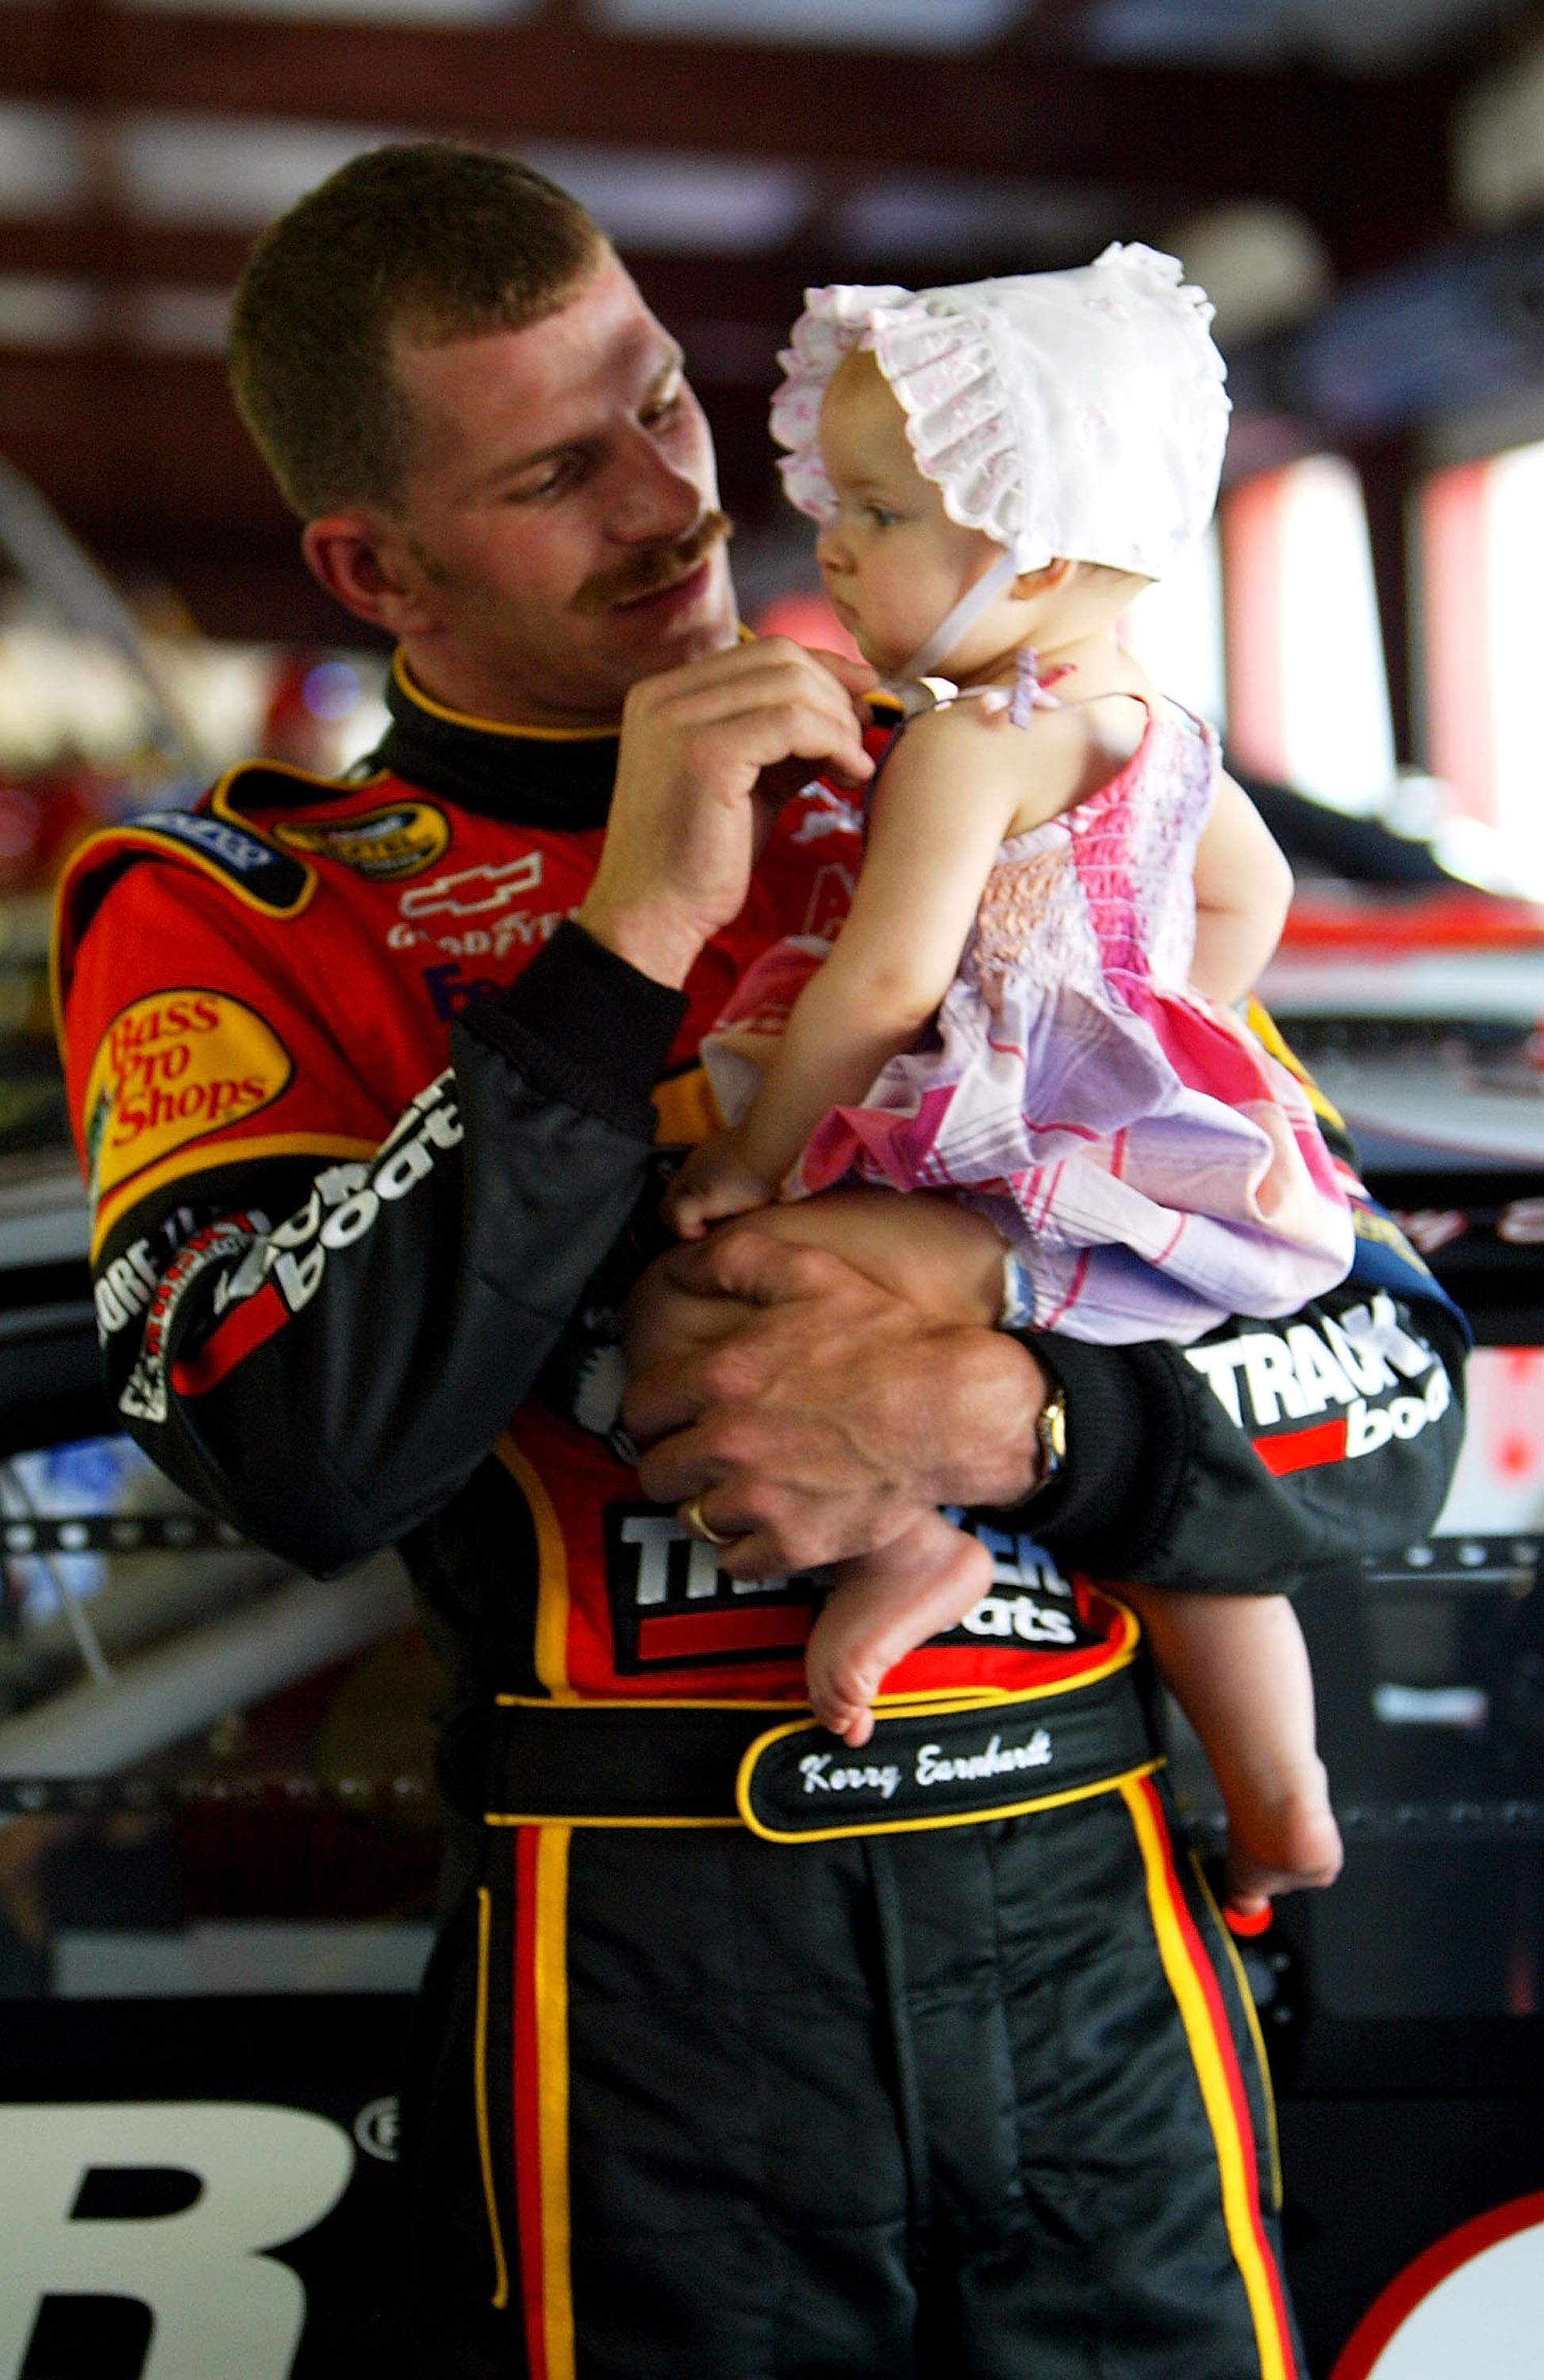 Kerry Earnhardt holds daughter Kaylan in the garage during practice for the Aaron's 499 on April 24, 2004, at Talladega SuperSpeedway, in Talladega, Alabama. | Source: Getty Images